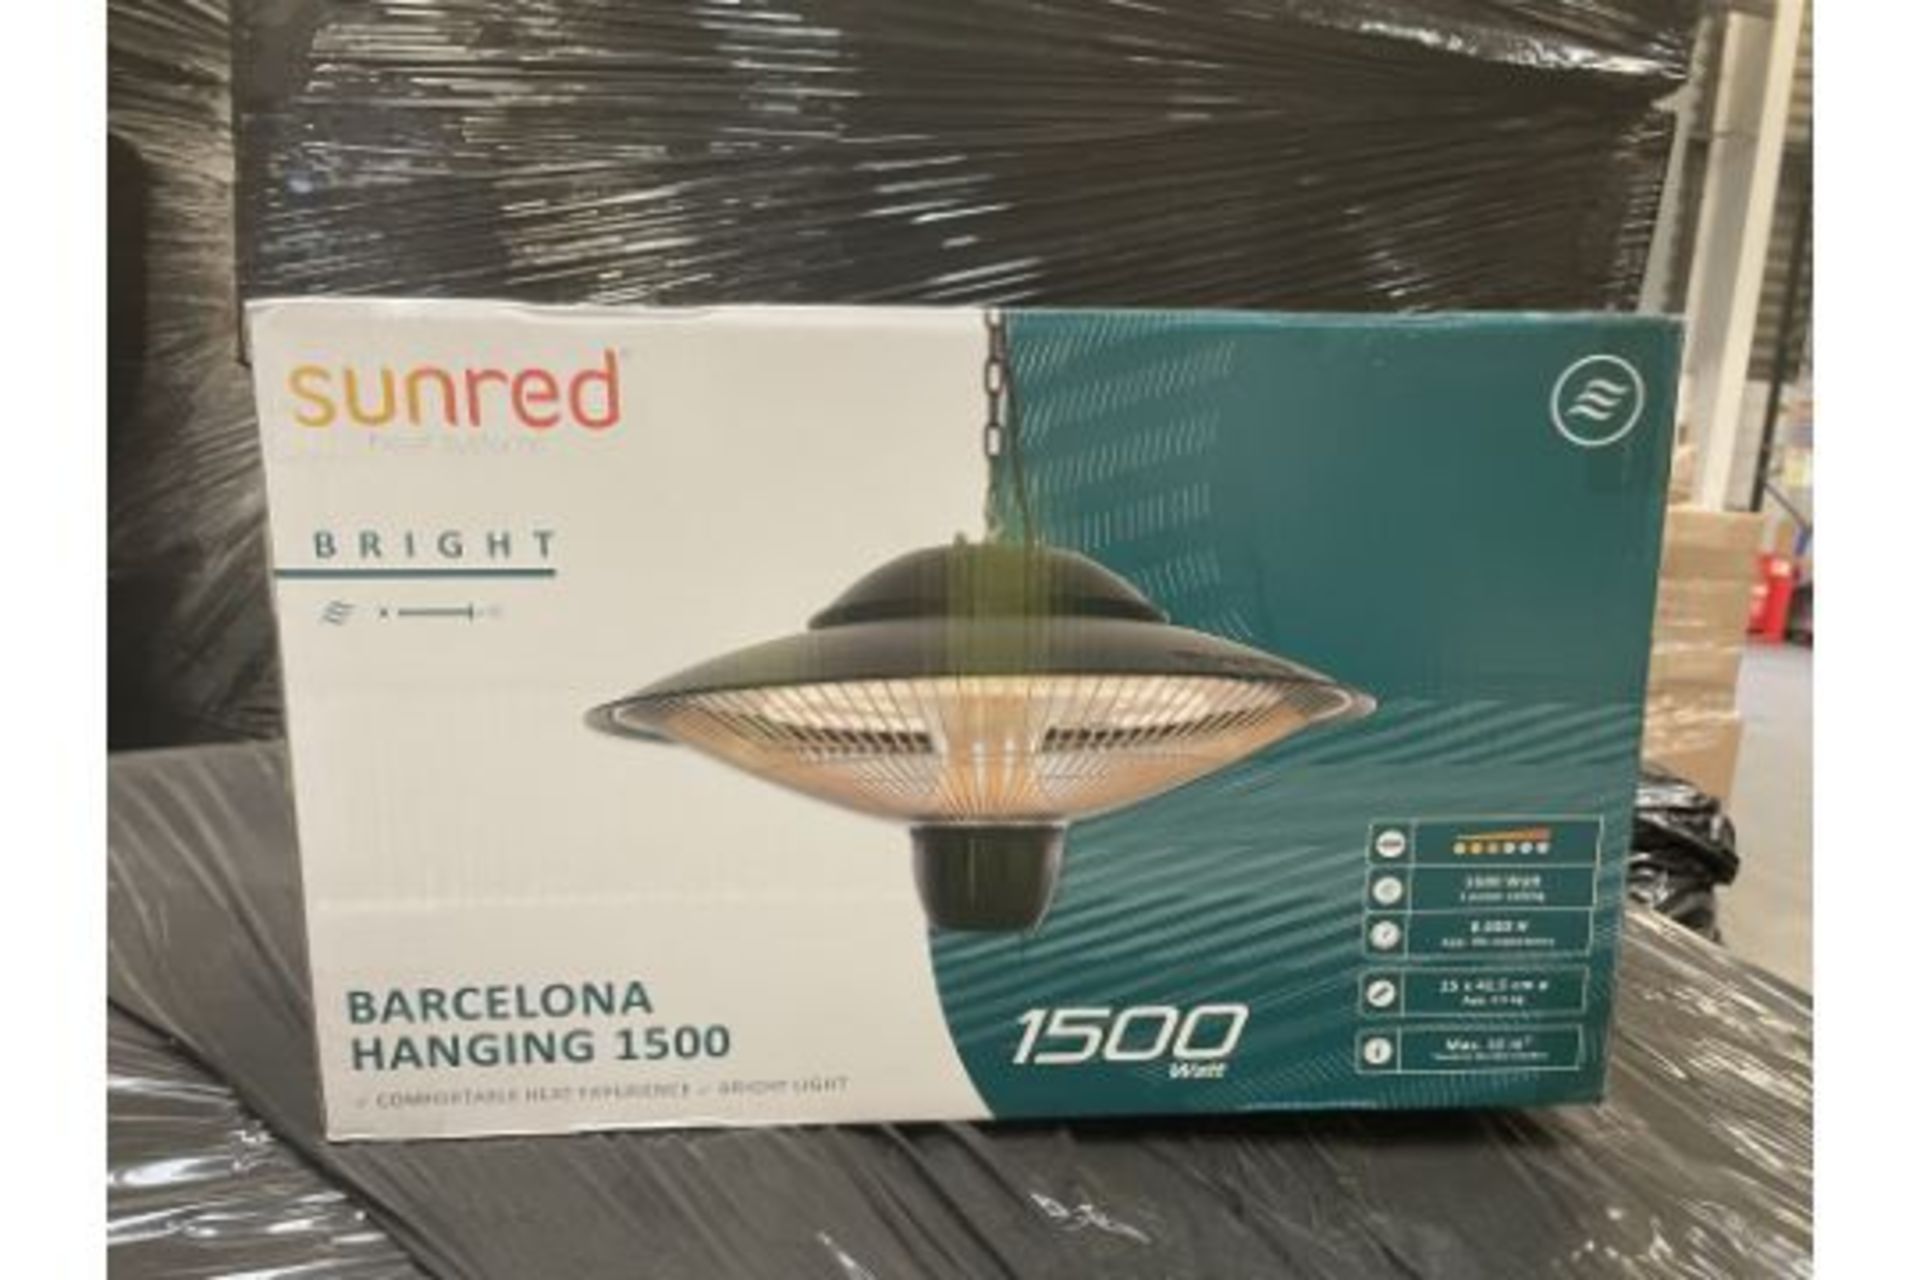 Trade Lot 4 x Brand New The Sunred Heater Barcelona Hanging 1500W RRP £299.A high quality and - Image 2 of 2